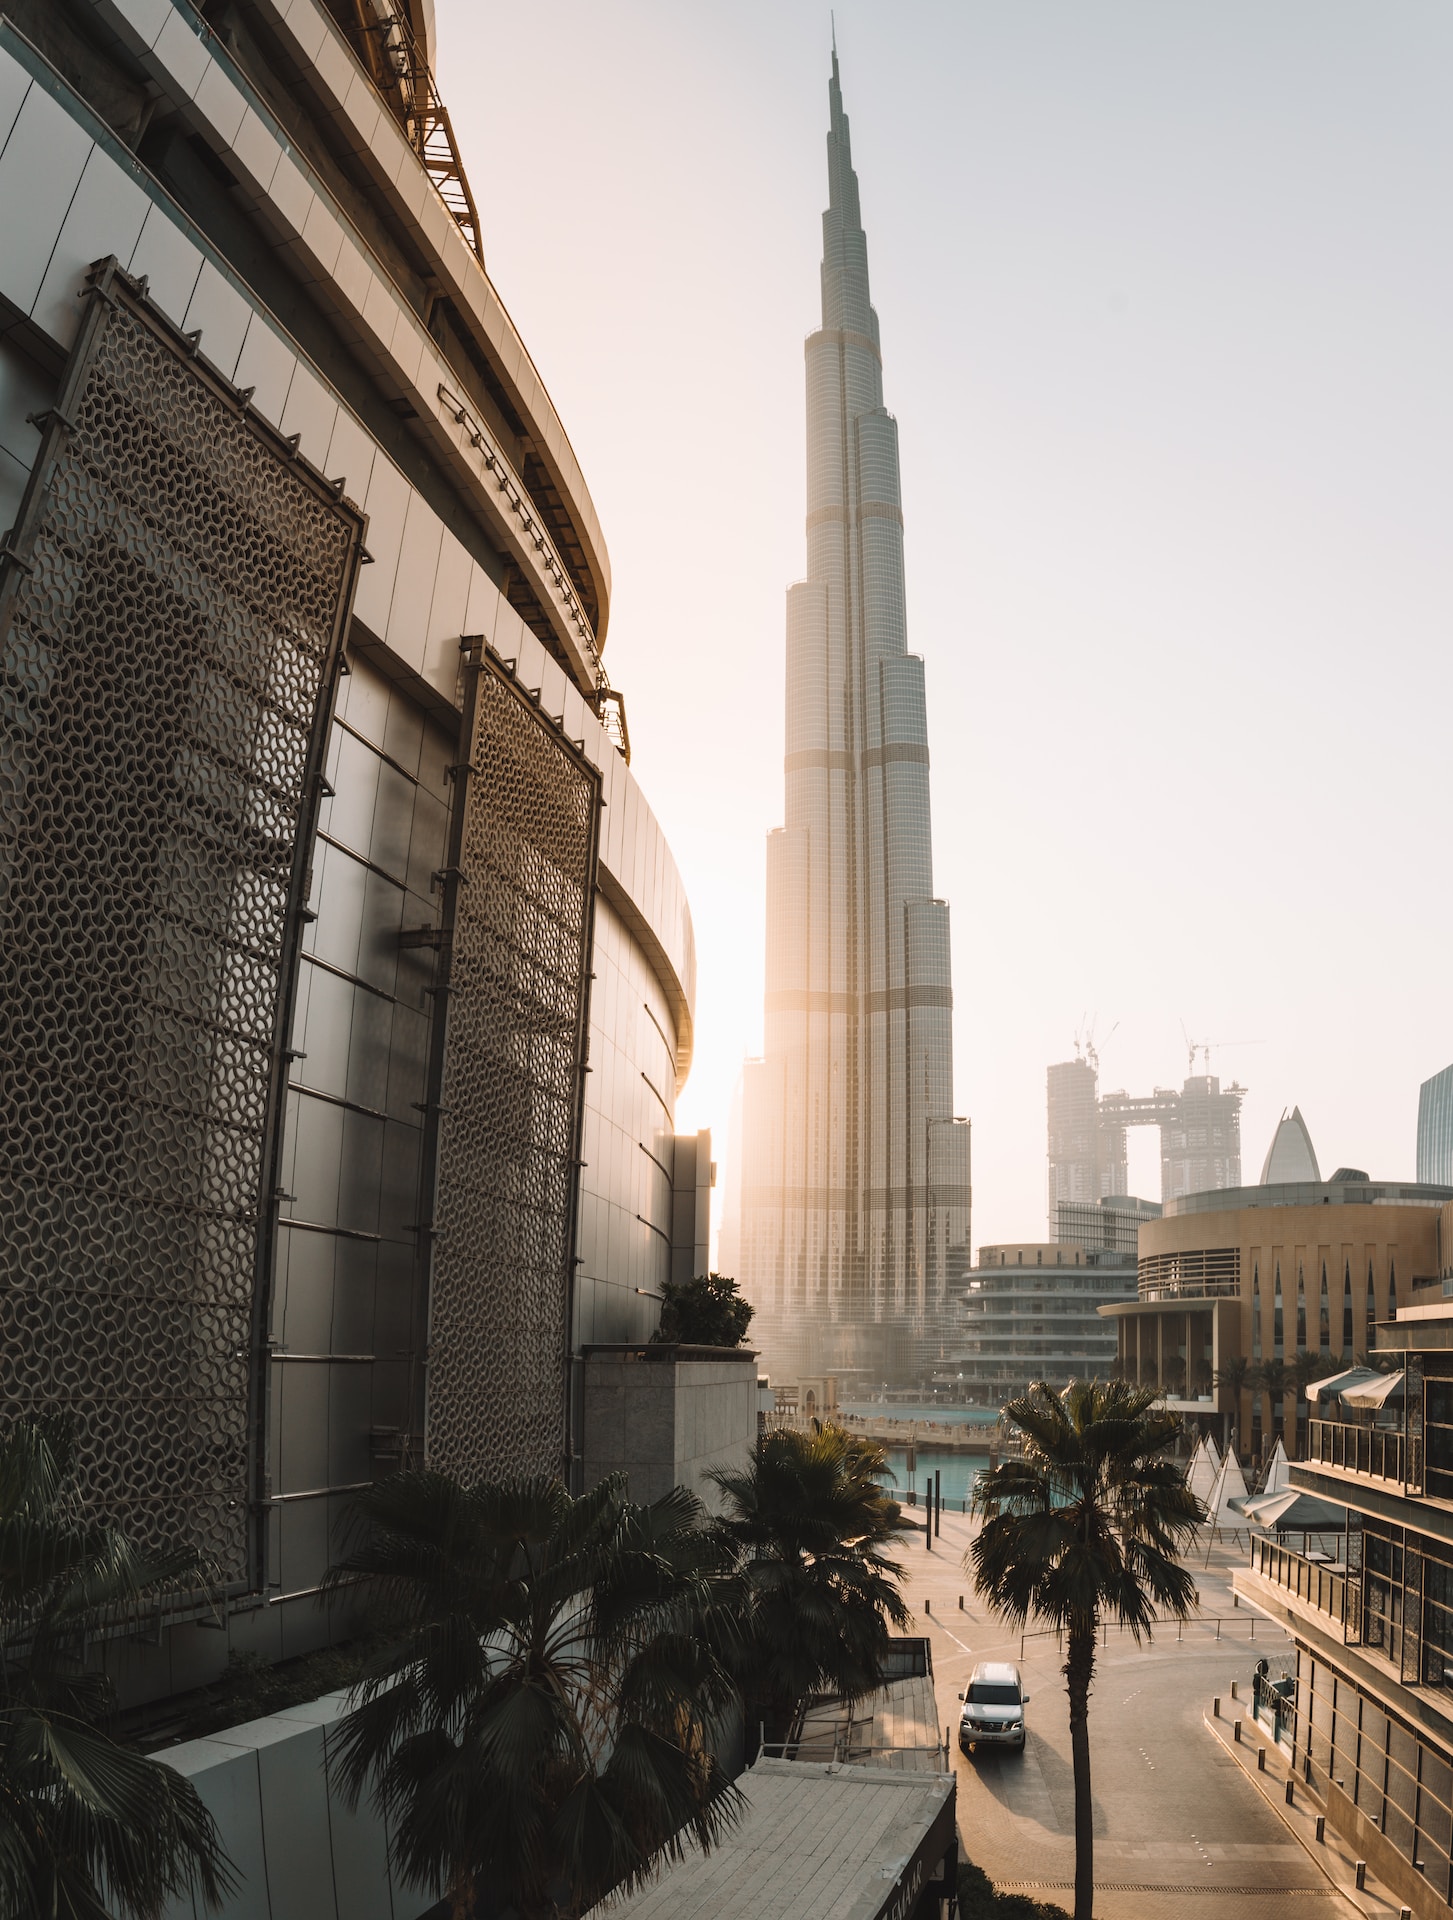 How much does a real estate agent make in Dubai?